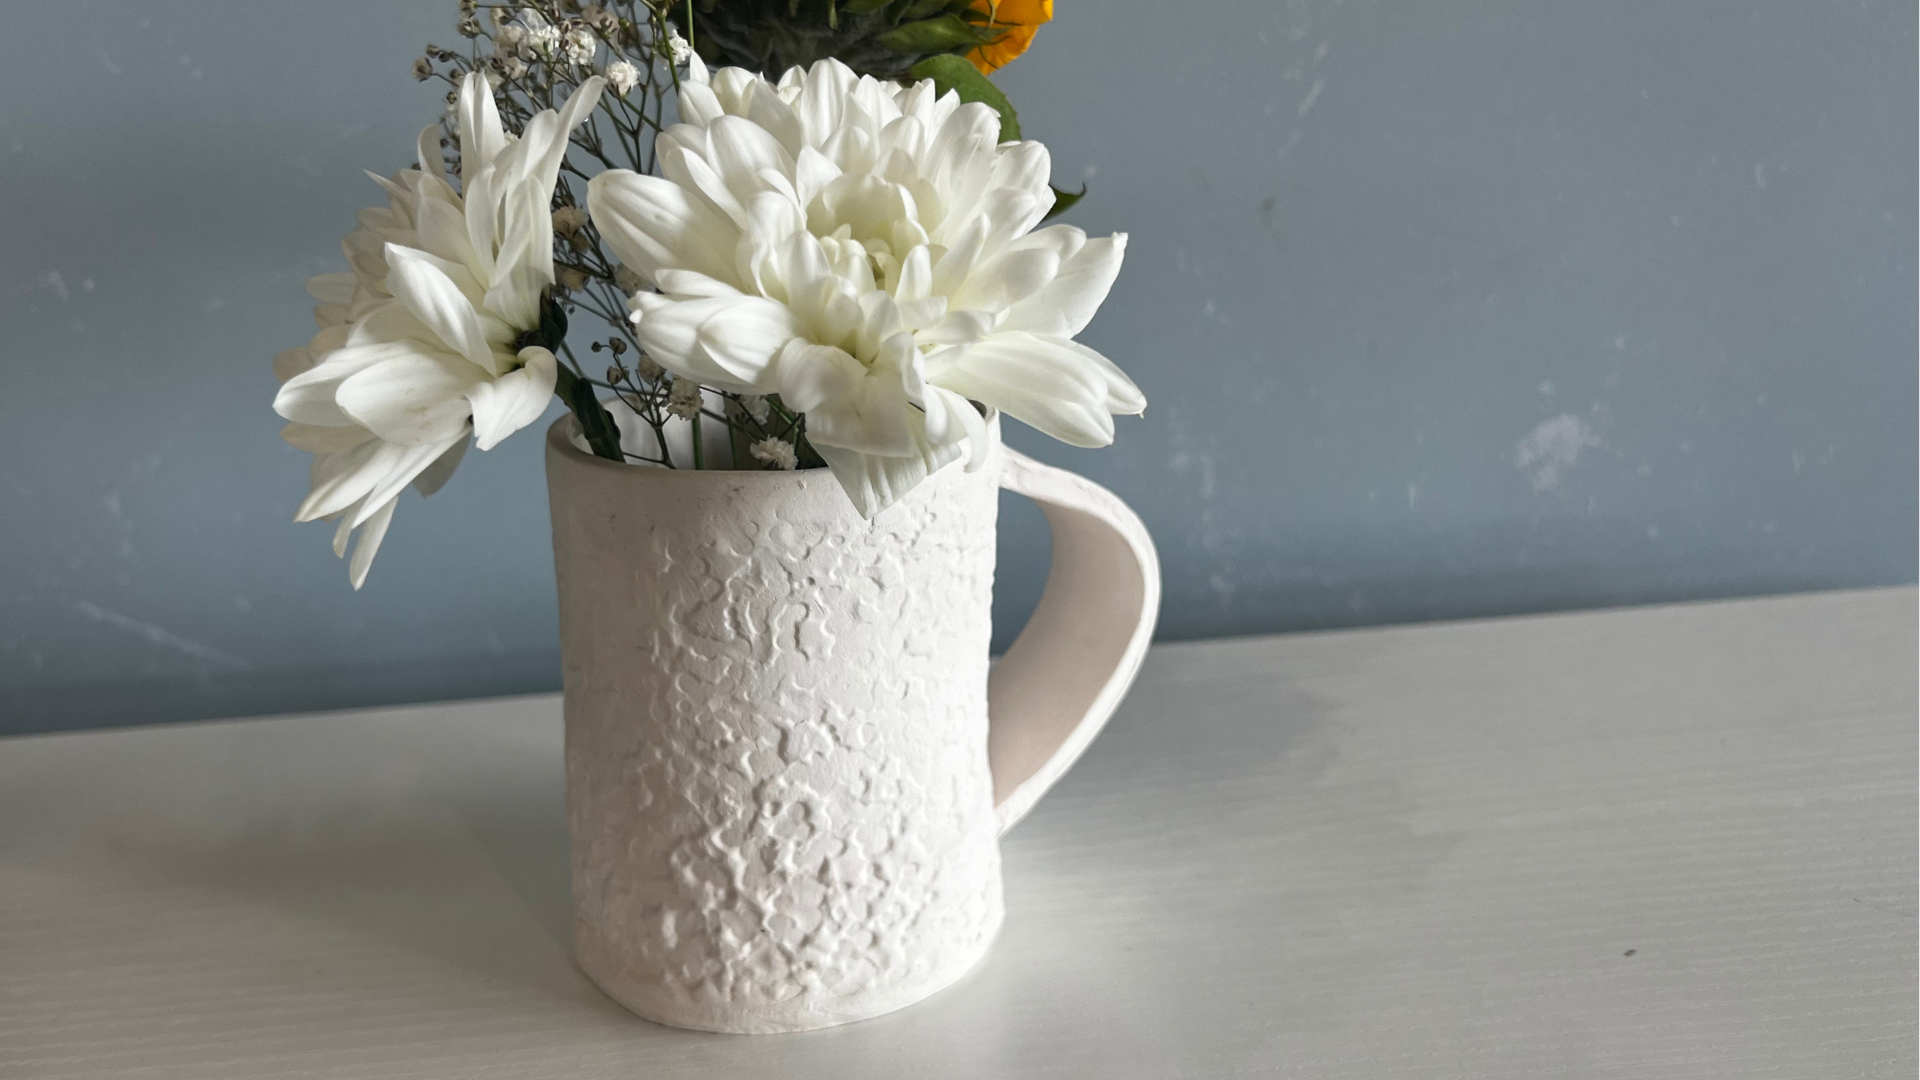 A pretty bisque fired pottery mug made during a pottery class at the Innovation Hub is filled with fresh flowers.